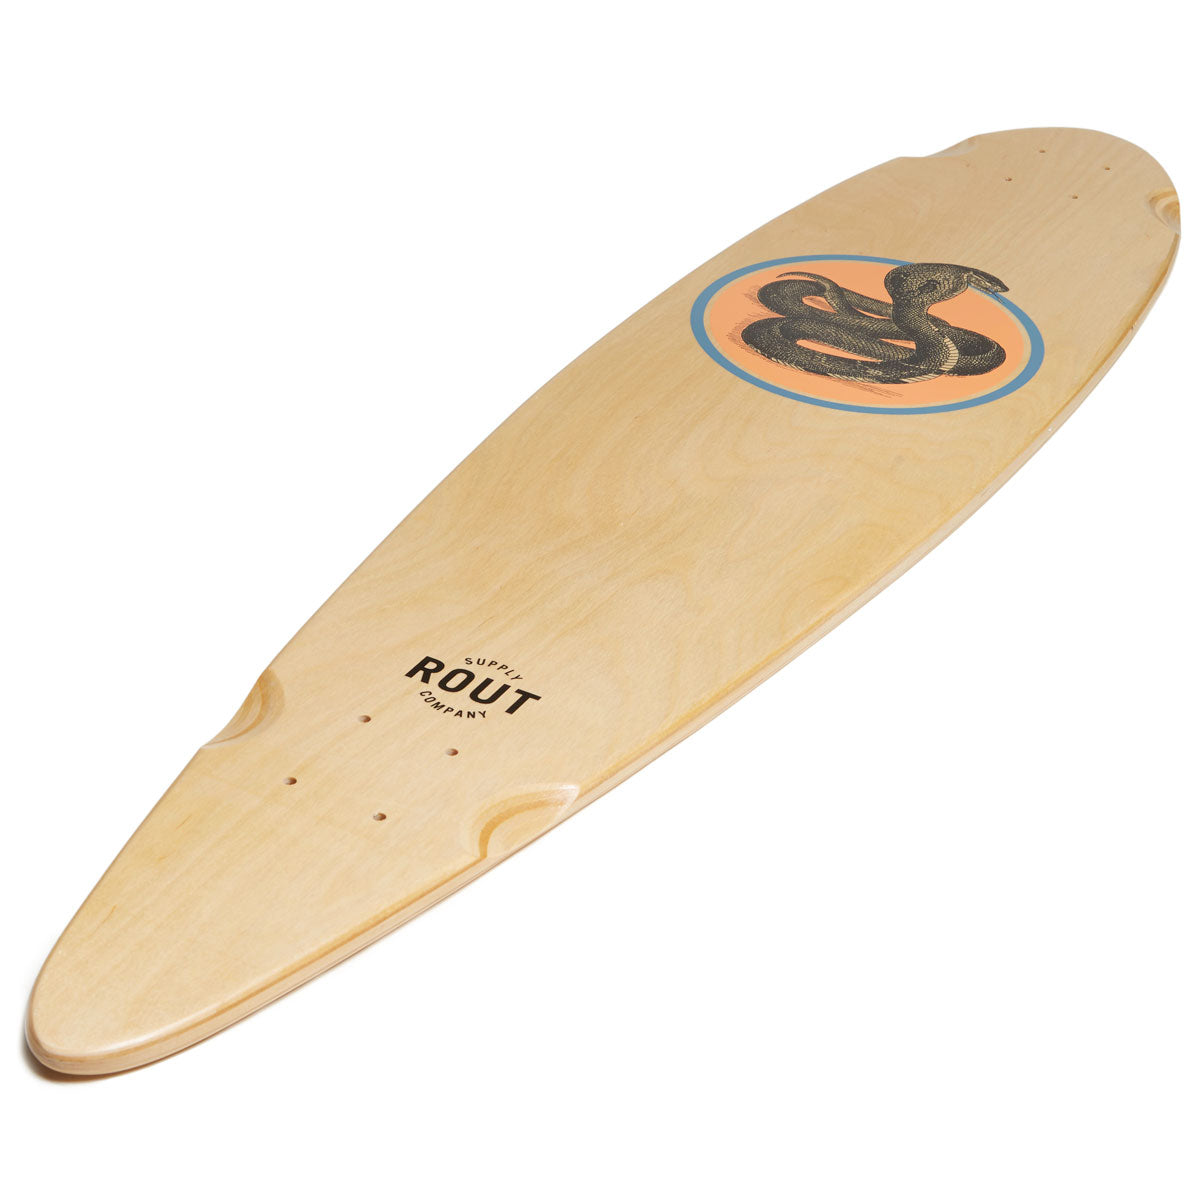 Rout Threat Pintail Longboard Deck image 4